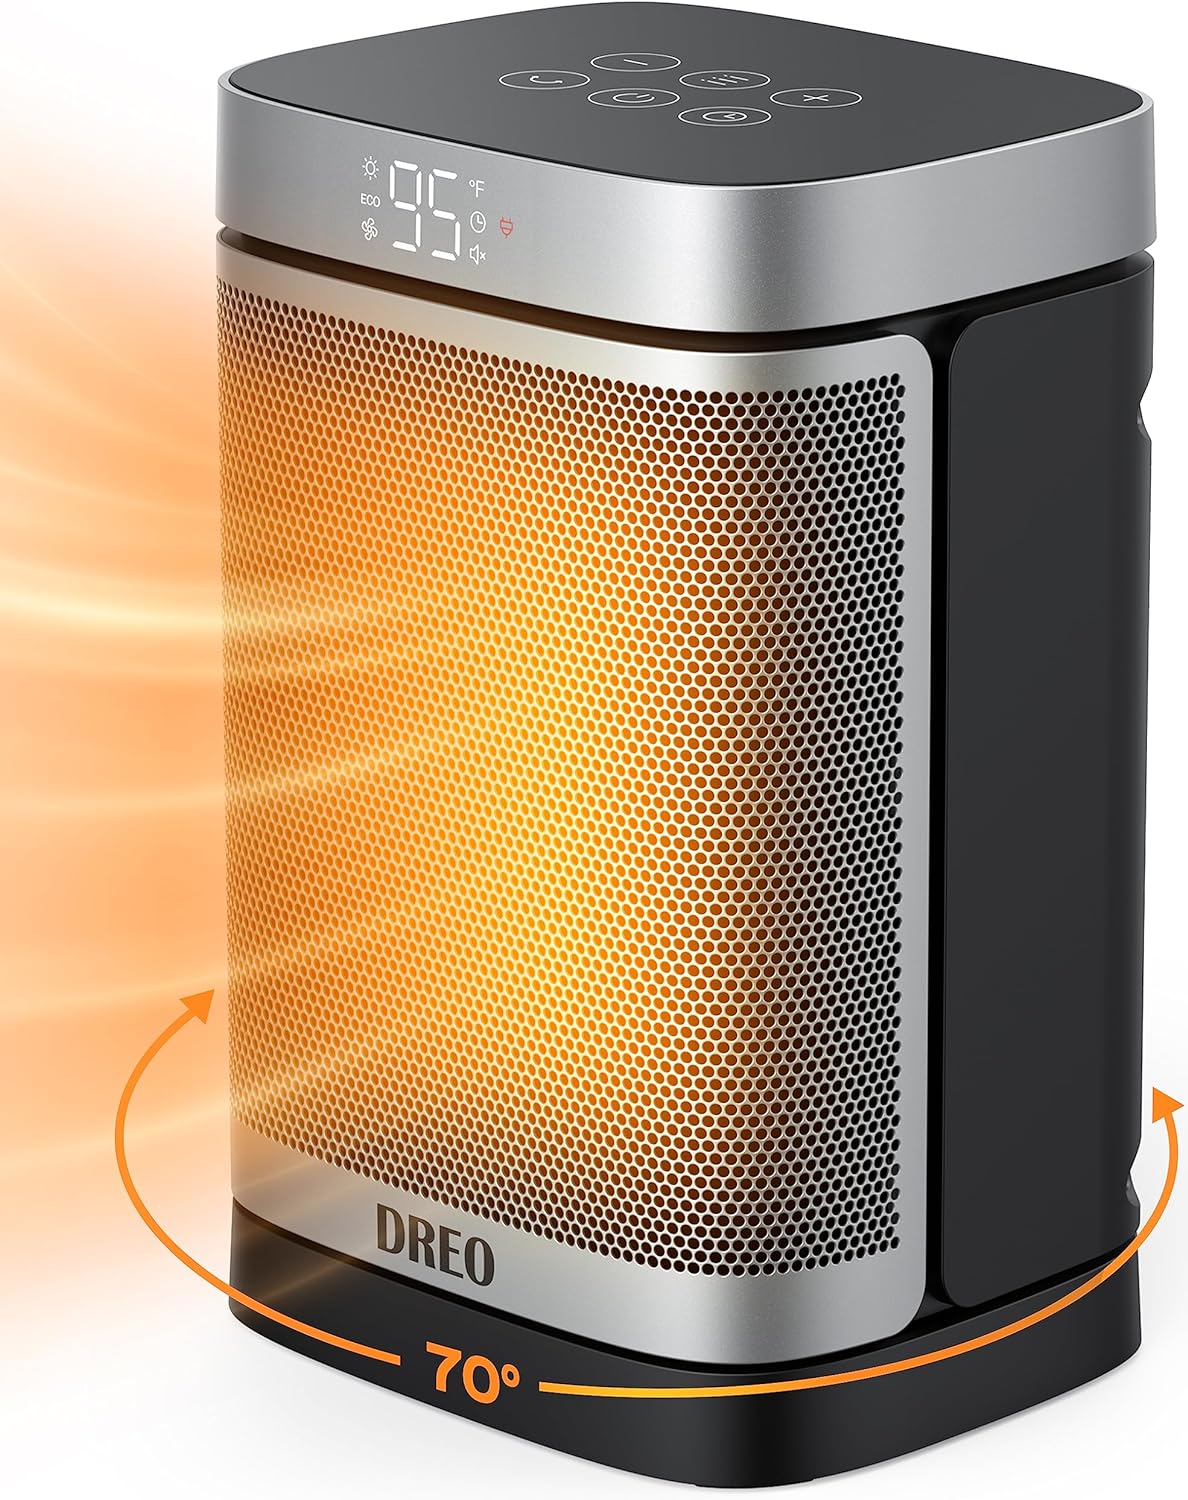 Dreo 1500W Space Heater, 70° Oscillating Electric Heater for Indoor Use, Digital Thermostat, 4 Modes, 12h Timer, Portable Personal Heater PTC Ceramic Heater Quick Safety Heating for Home Office